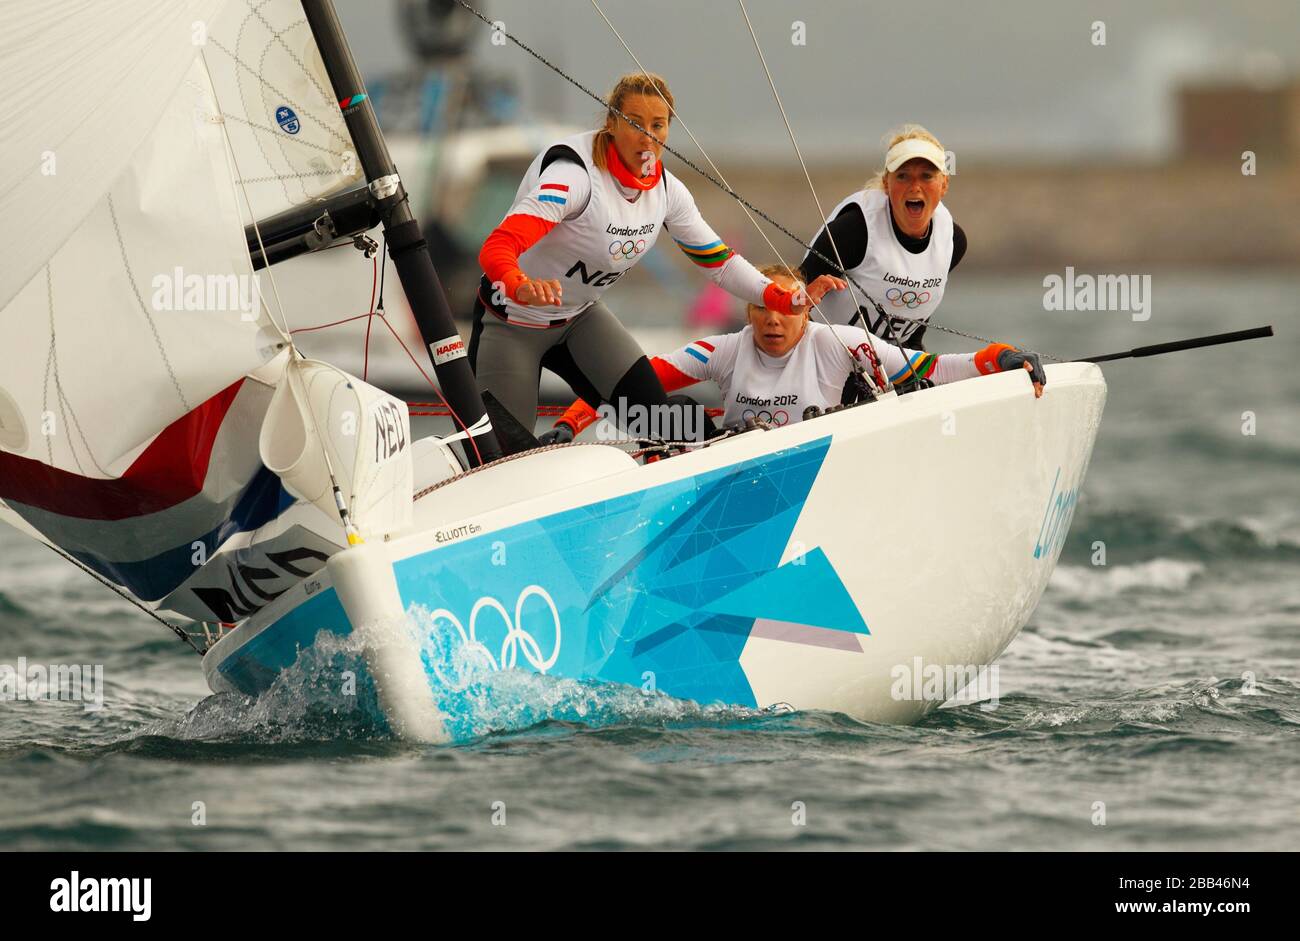 The Netherlands' Women's Match Racing team of Renee Groeneveld, Annemieke  Bes and Marcelien Bos-de Koning racing on Weymouth Bay today during the  Olympic Games Stock Photo - Alamy